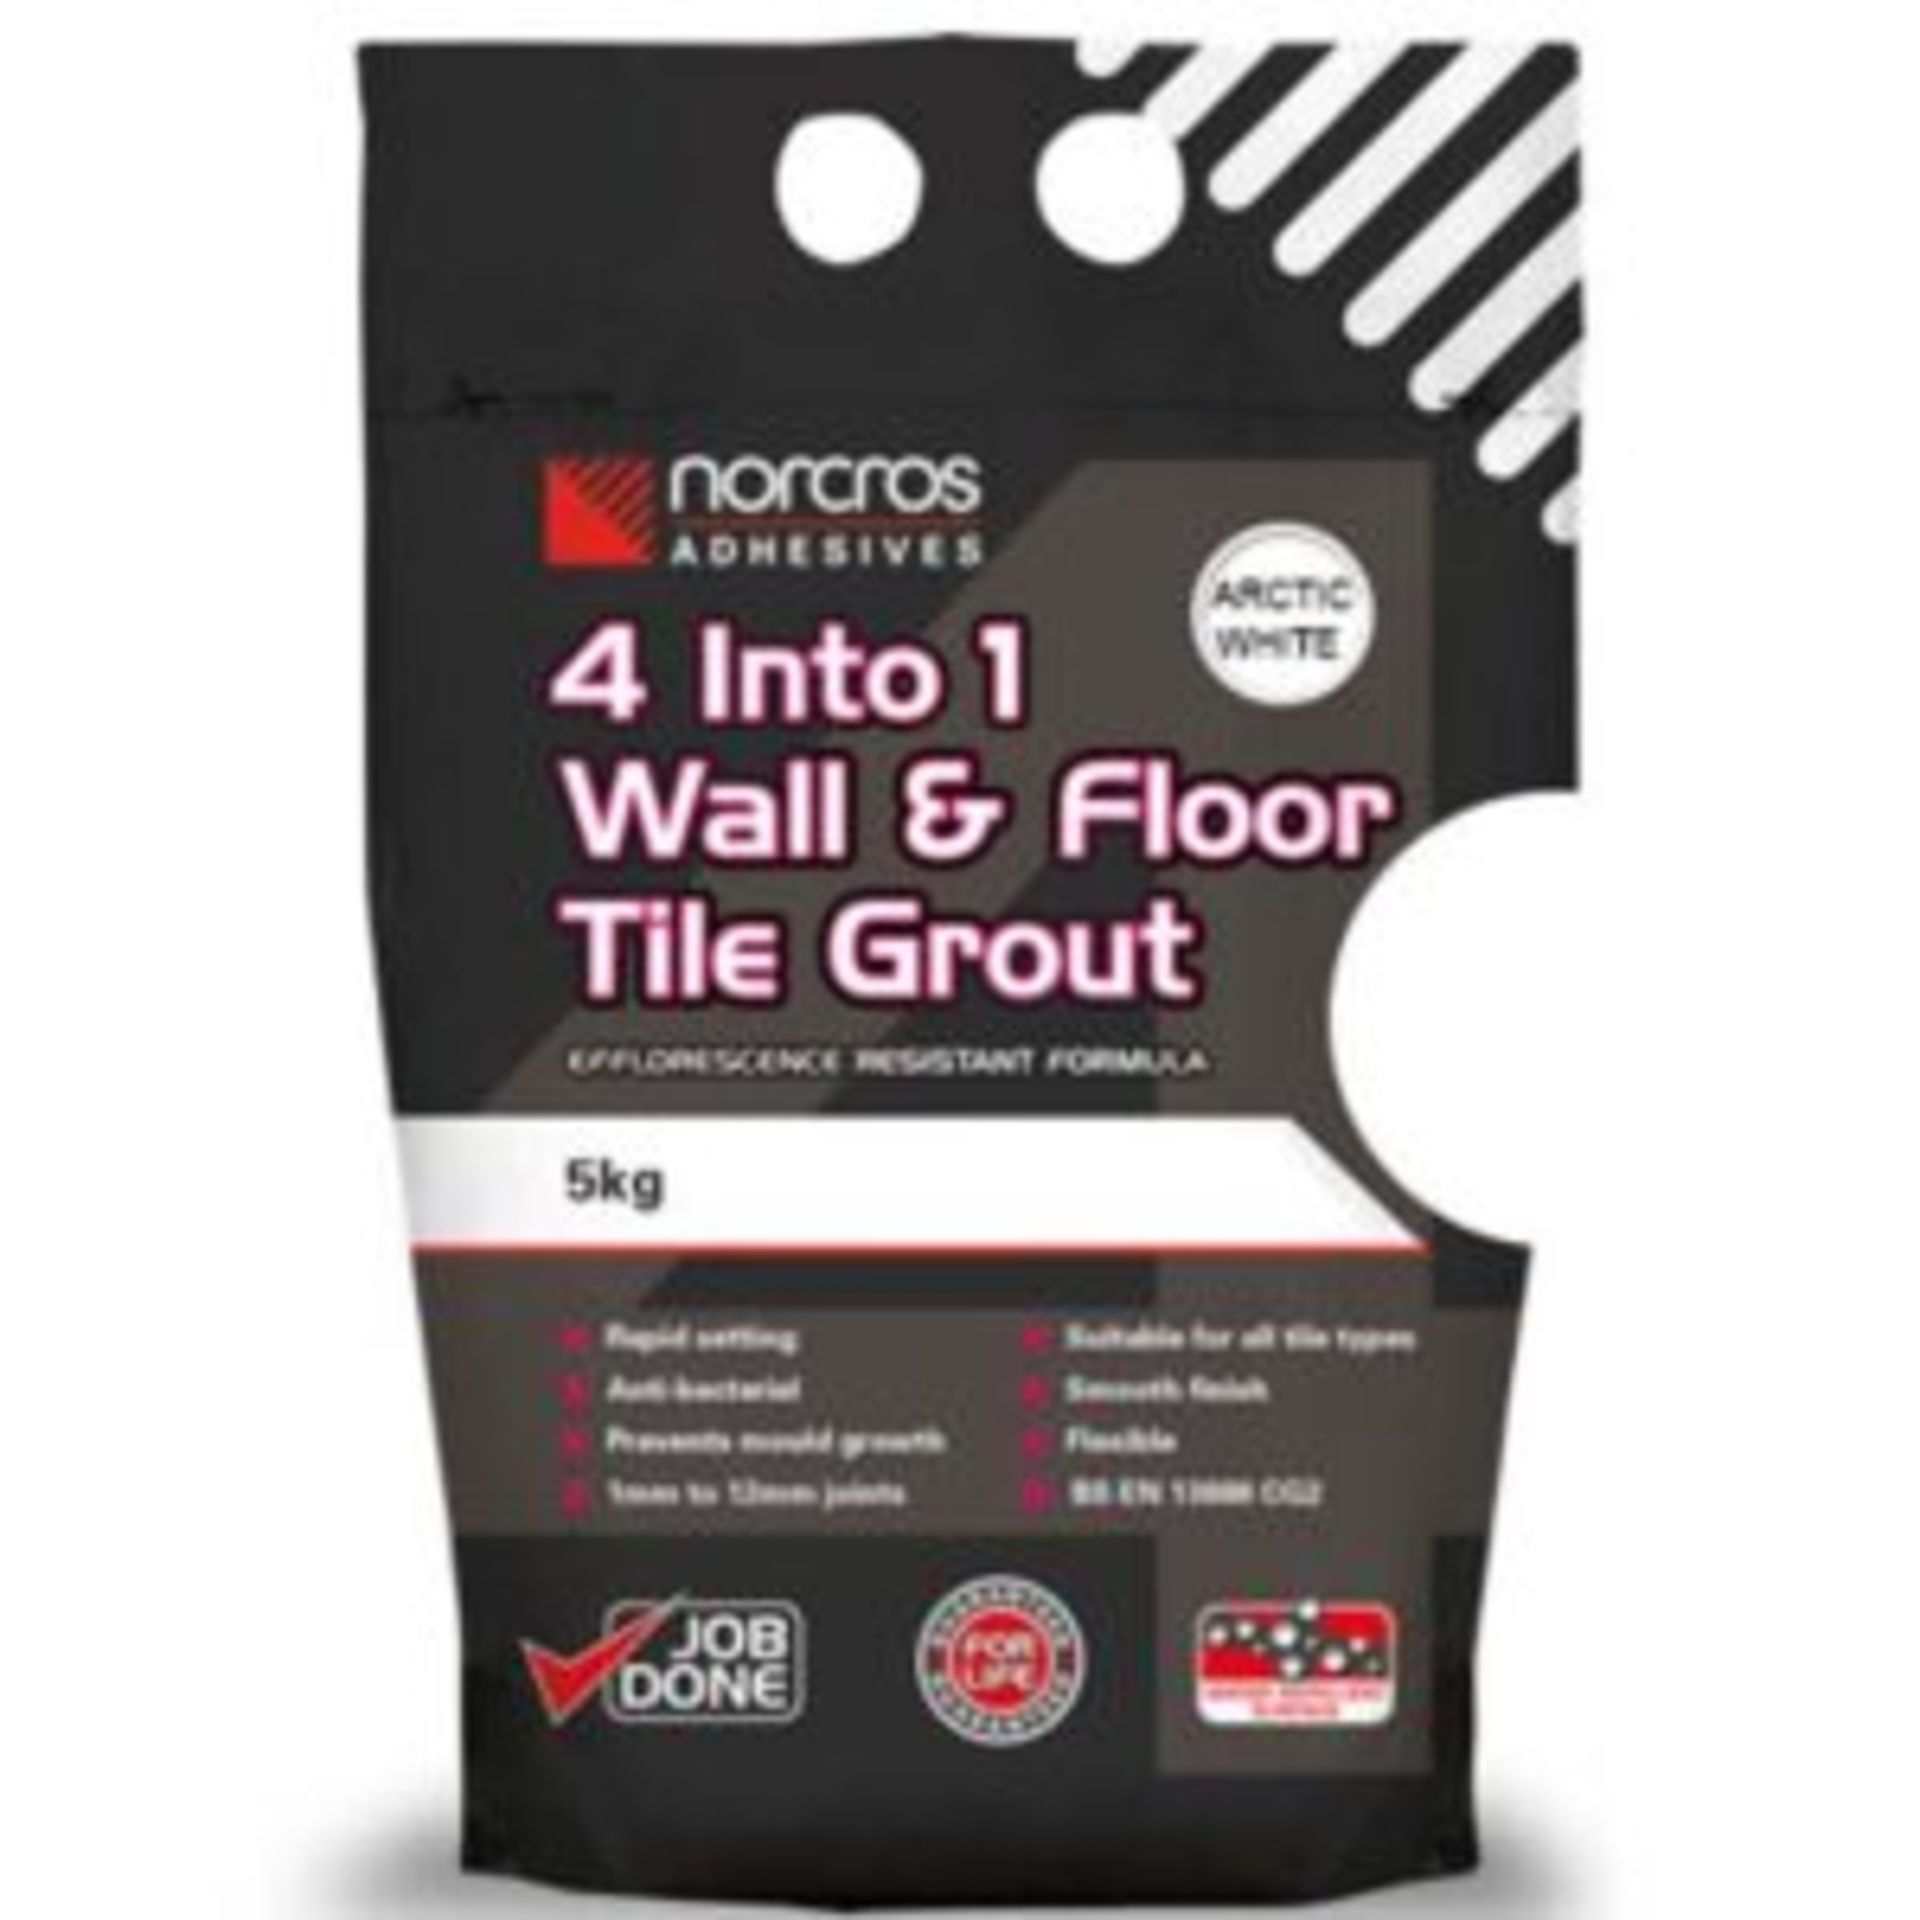 PALLET TO CONTAIN 72 x NEW 5KG BAGS OF NORCROS 4 INTO 1 WALL & FLOOR TILE GROUT – ARCTIC WHITE – 5KG